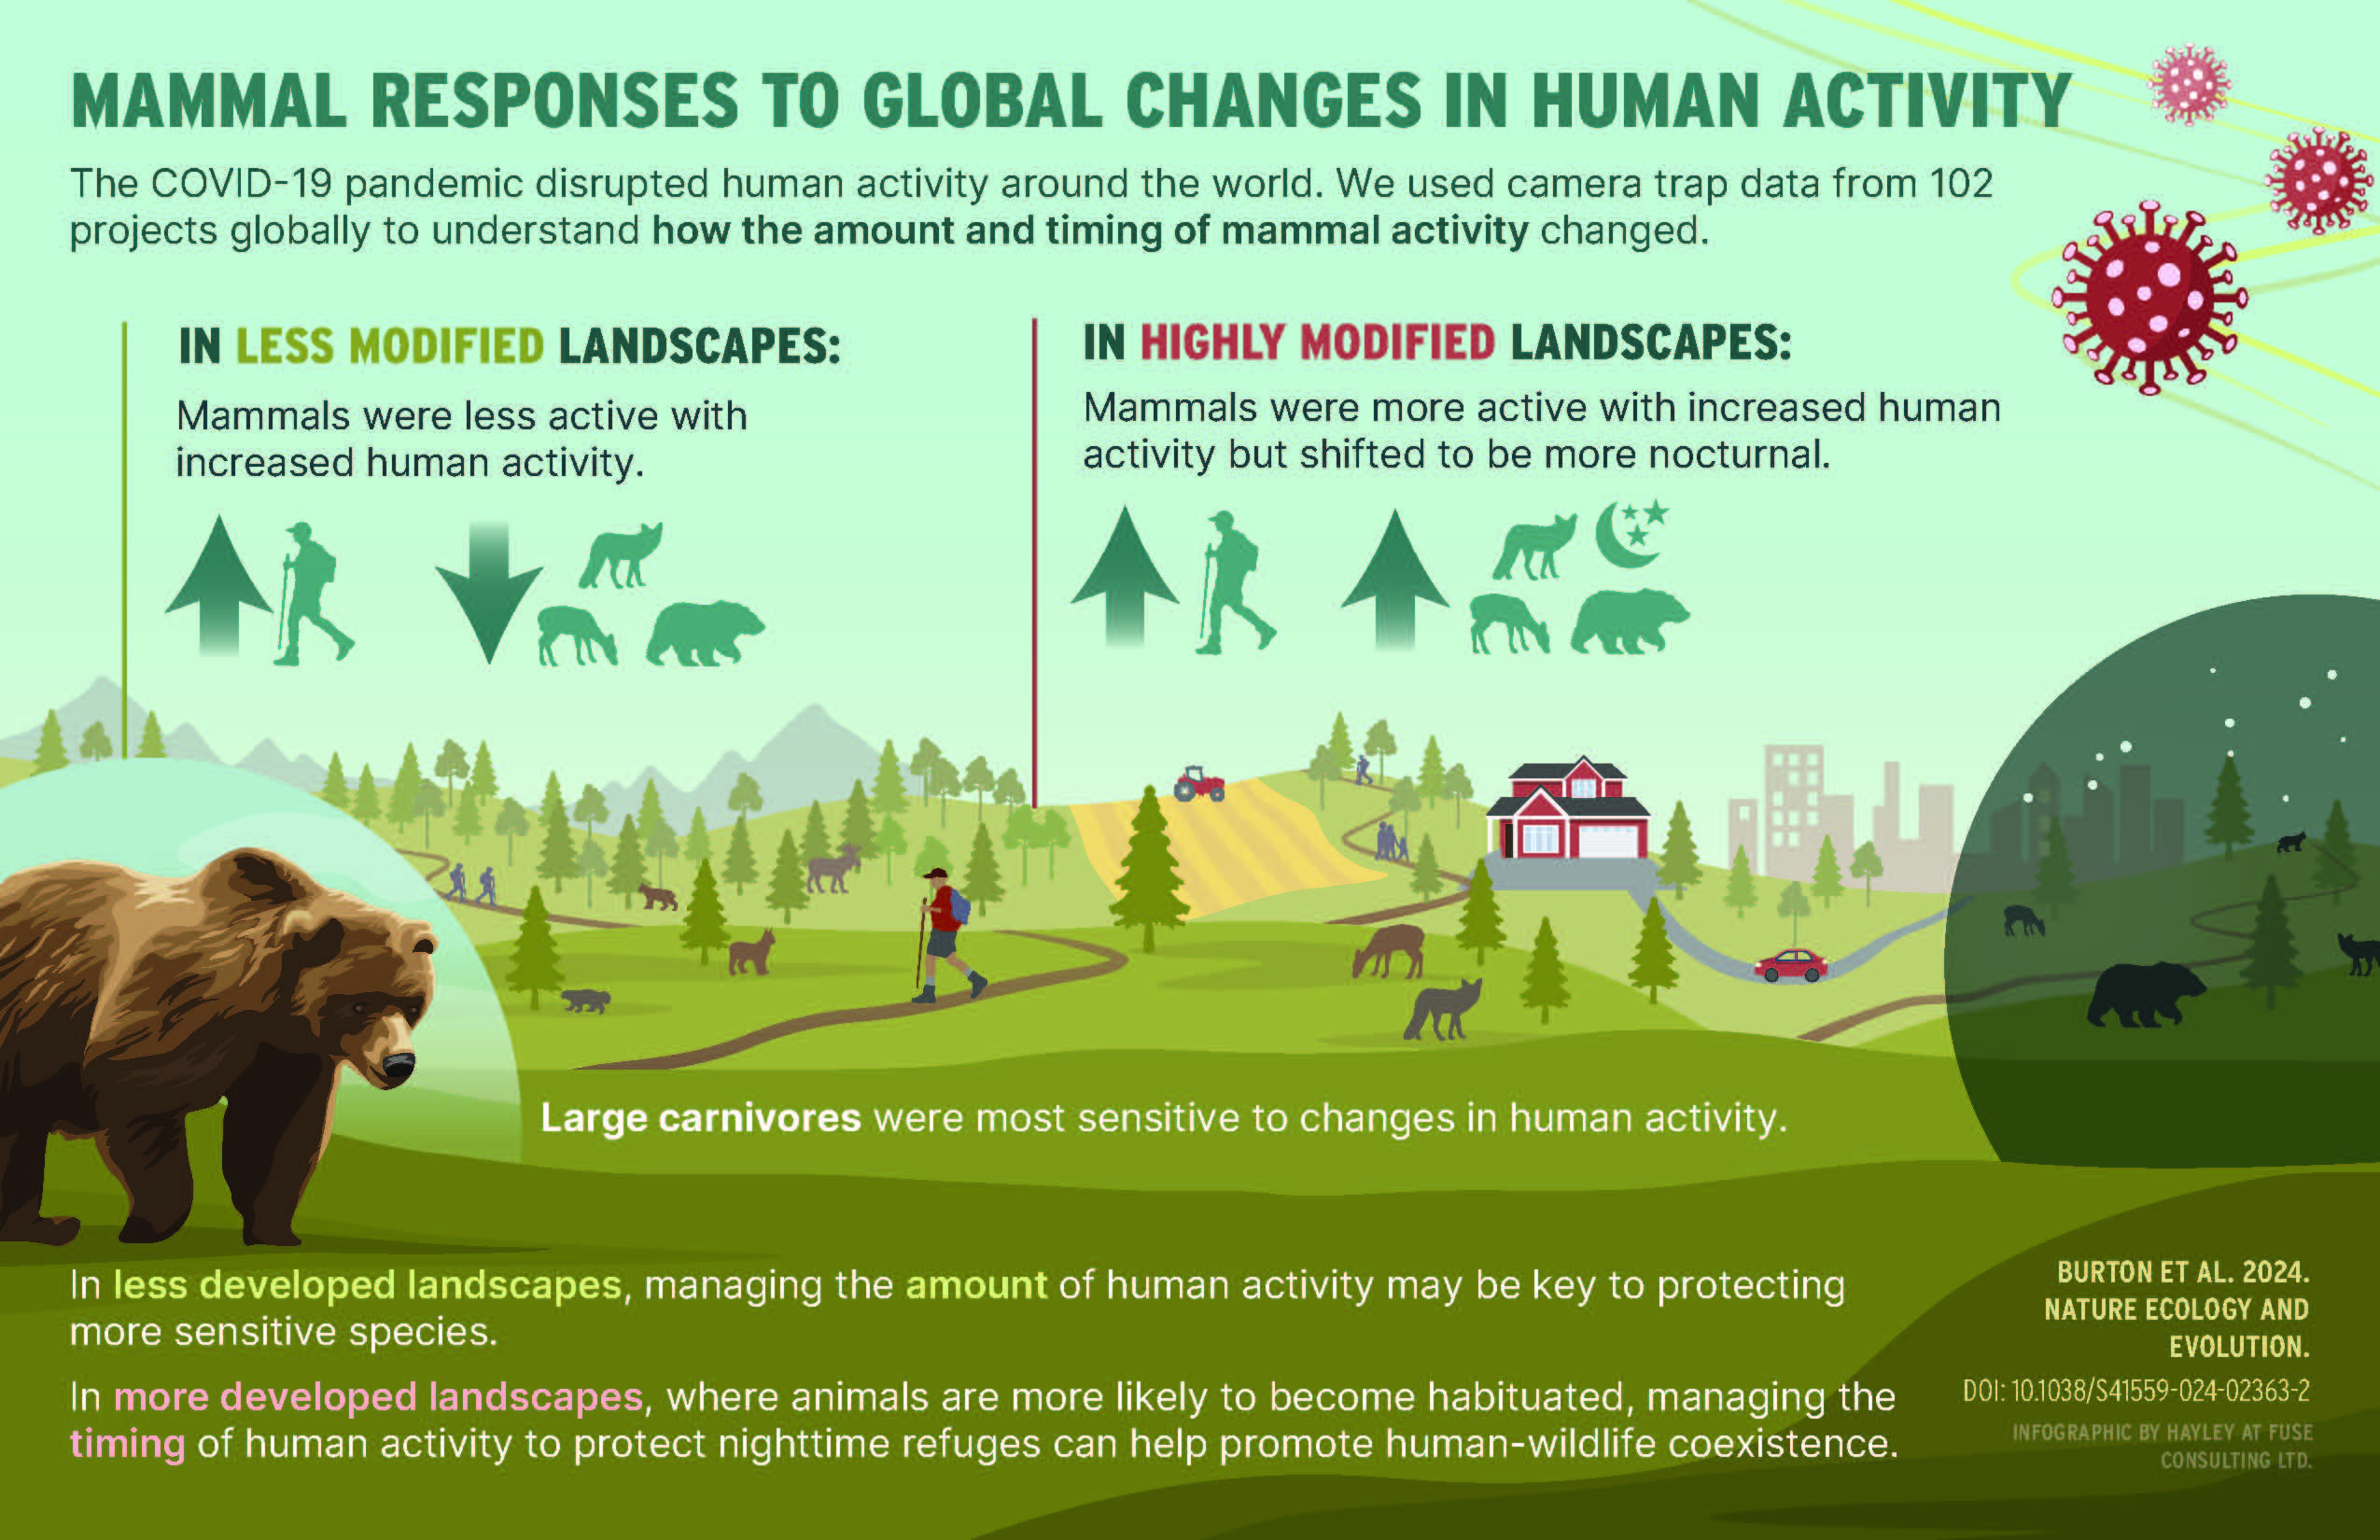 An infographic illustrating how different mammals responded to changes in human activity during the pandemic.